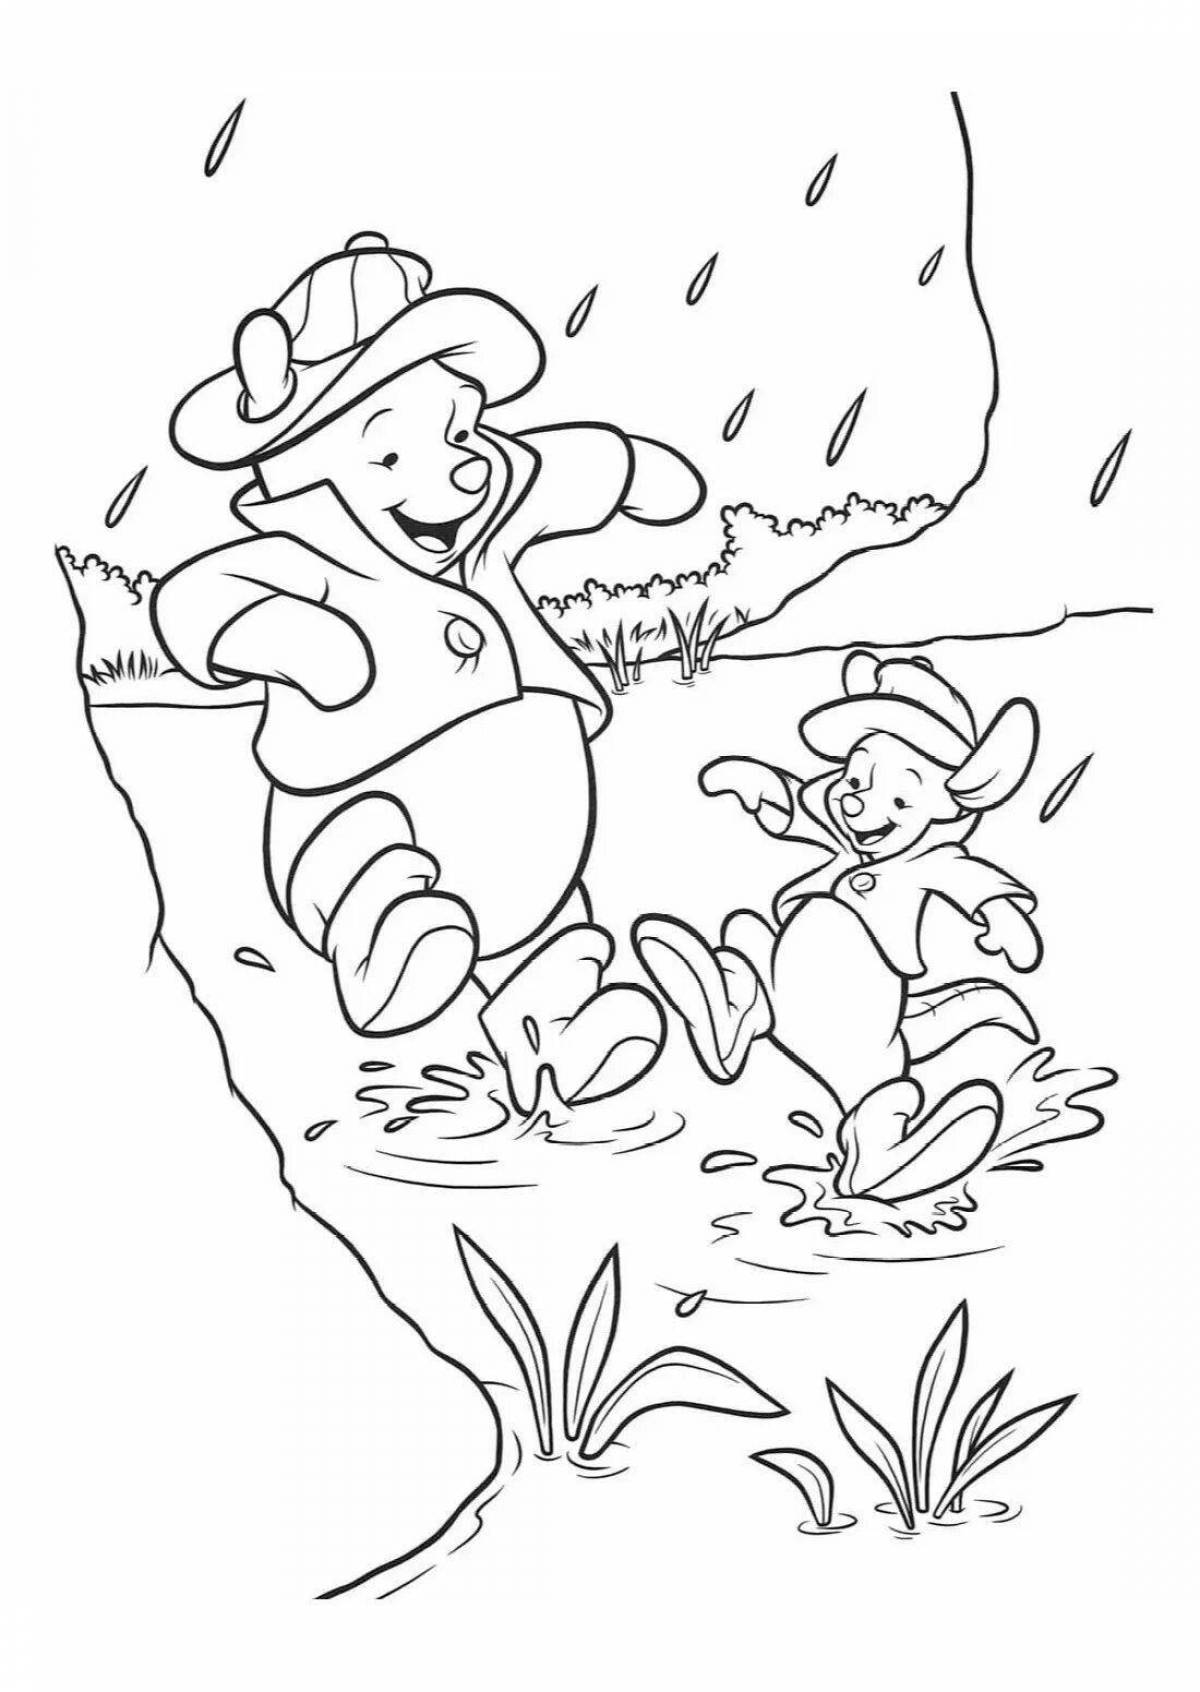 Animated puddle coloring page